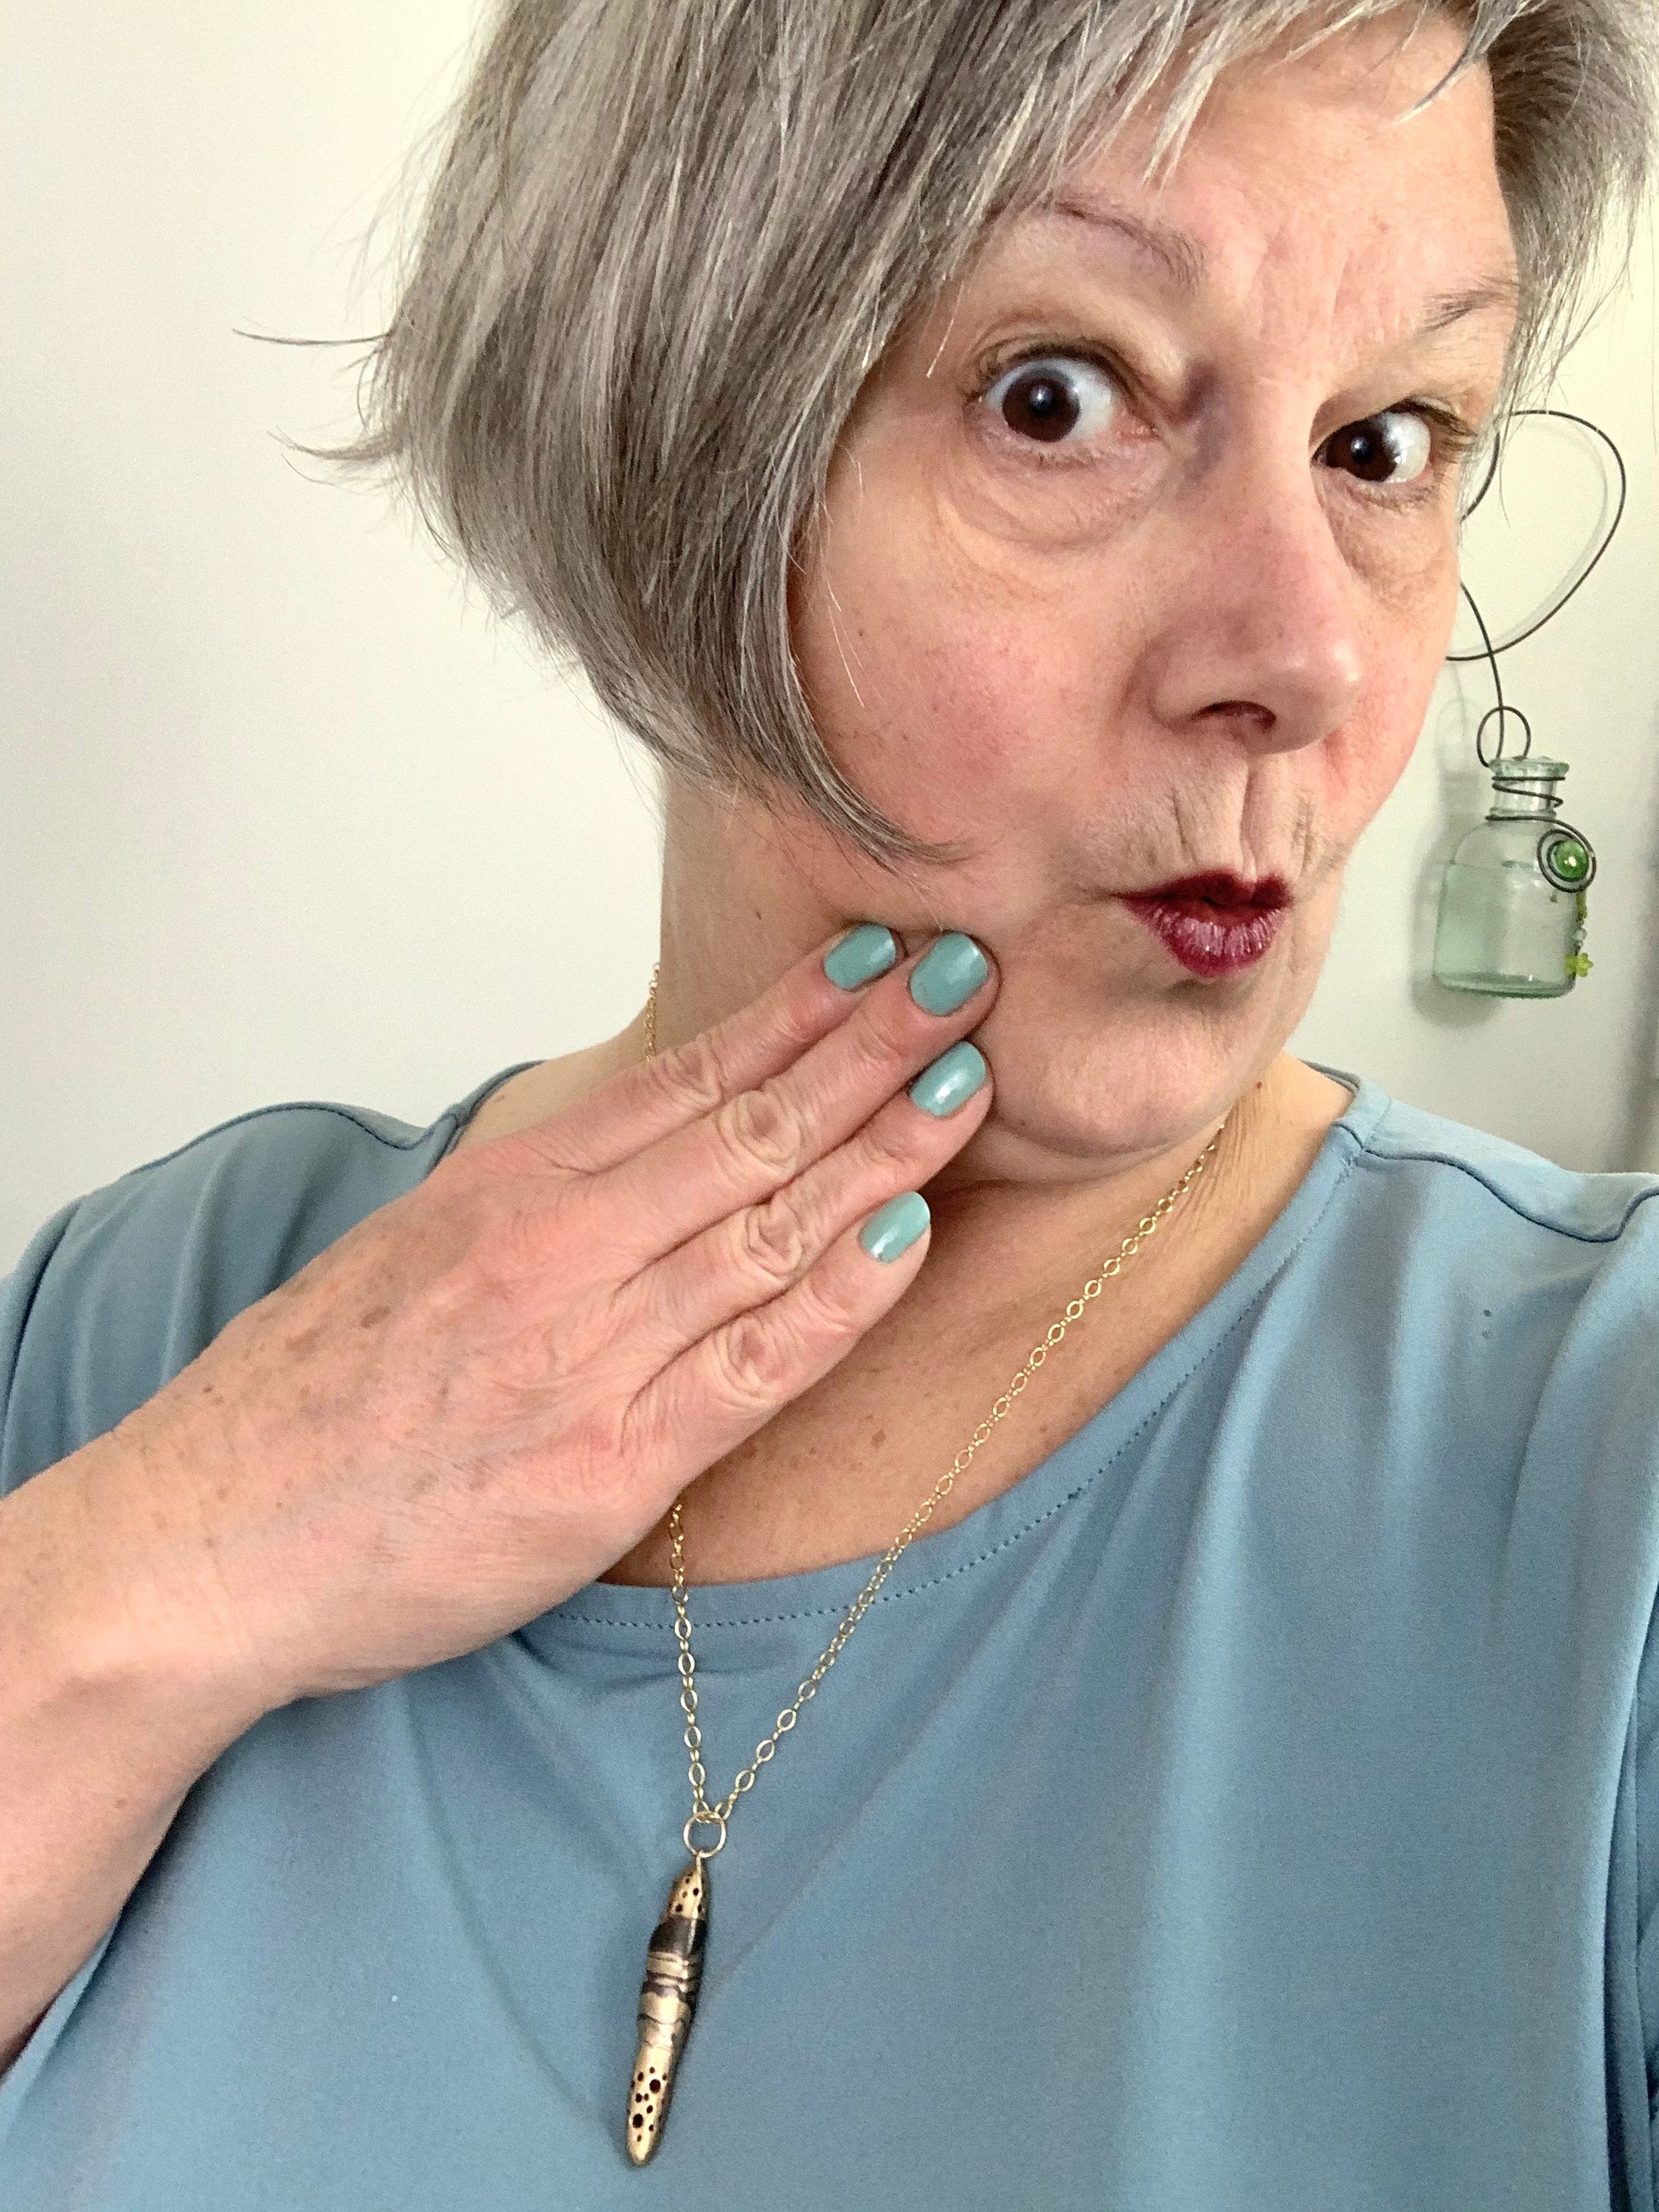 A surprised mid-life woman wearing art jewelry necklace